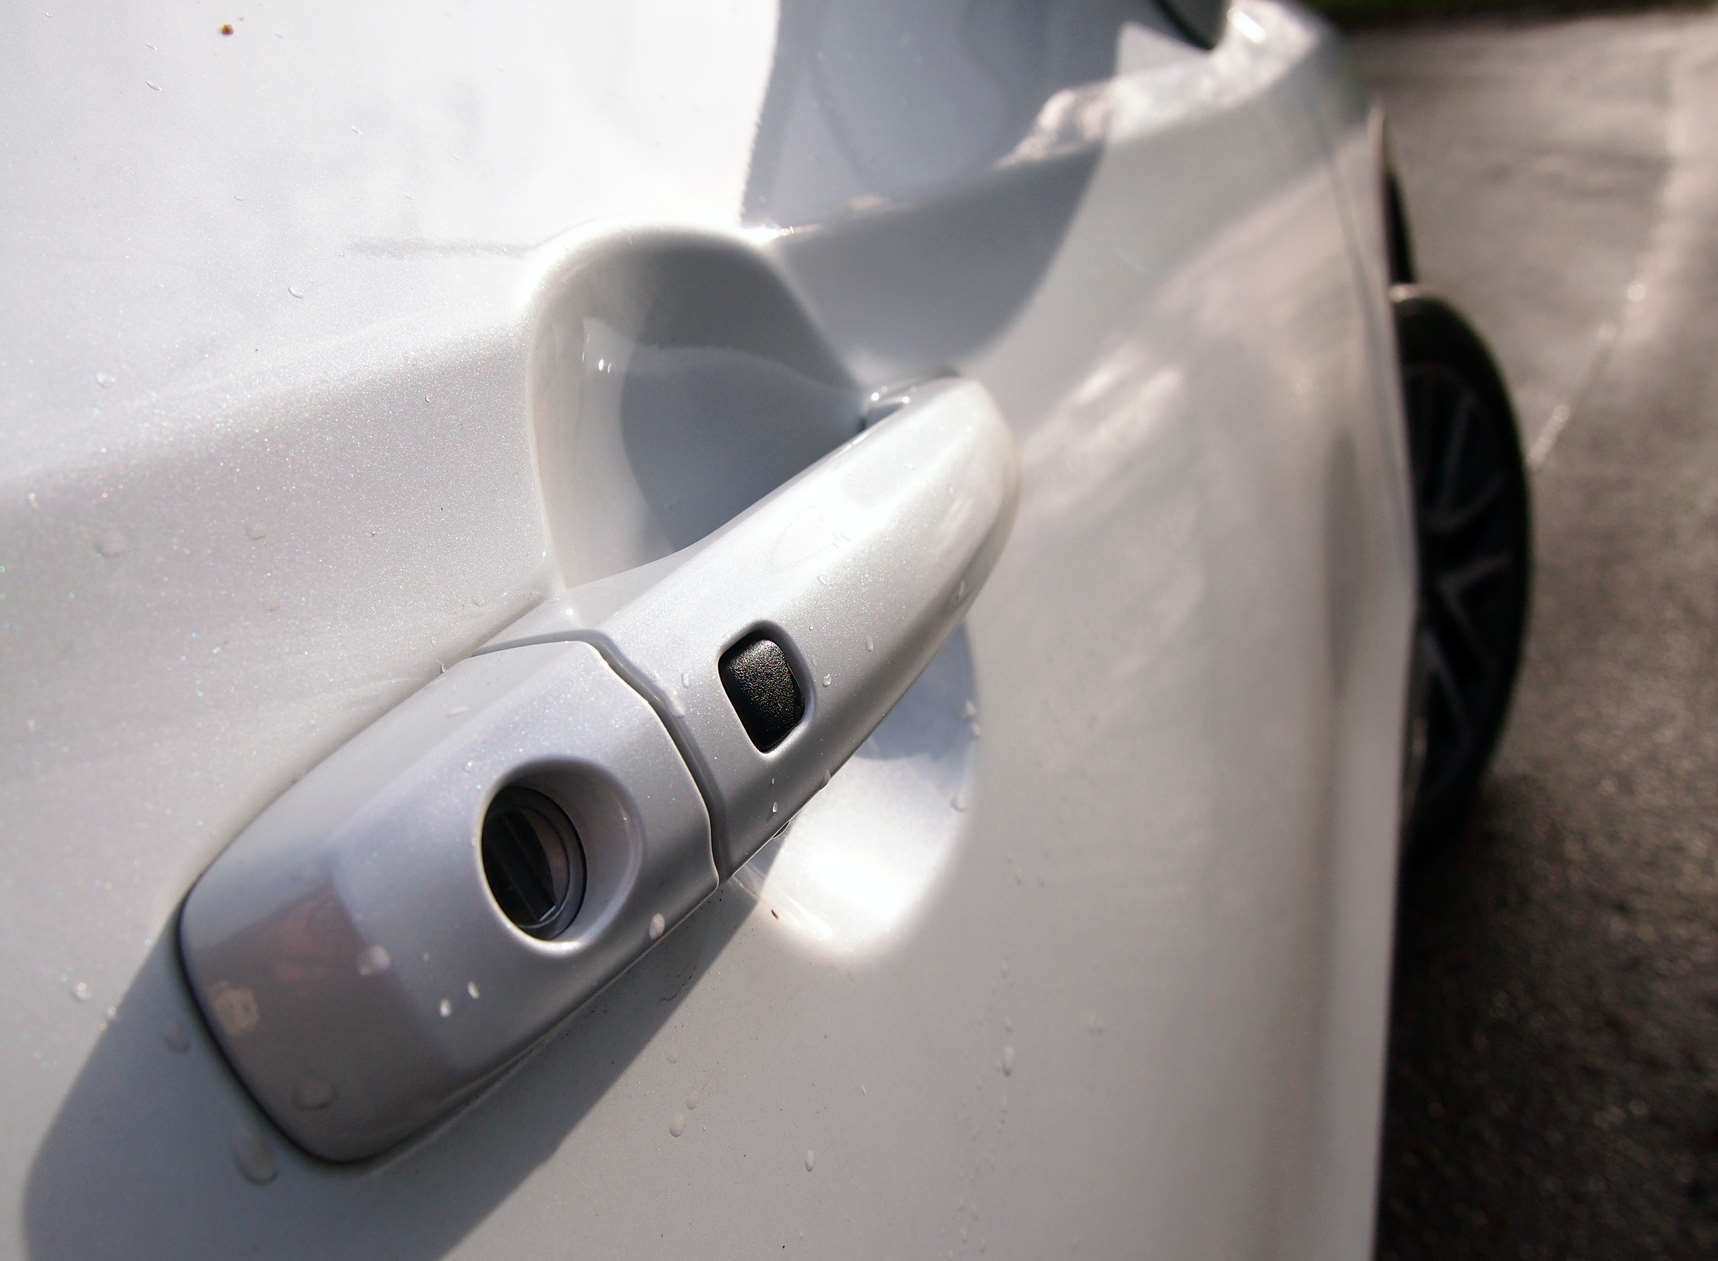 Thieves have been targeting vehicles parked in and around Sittingbourne